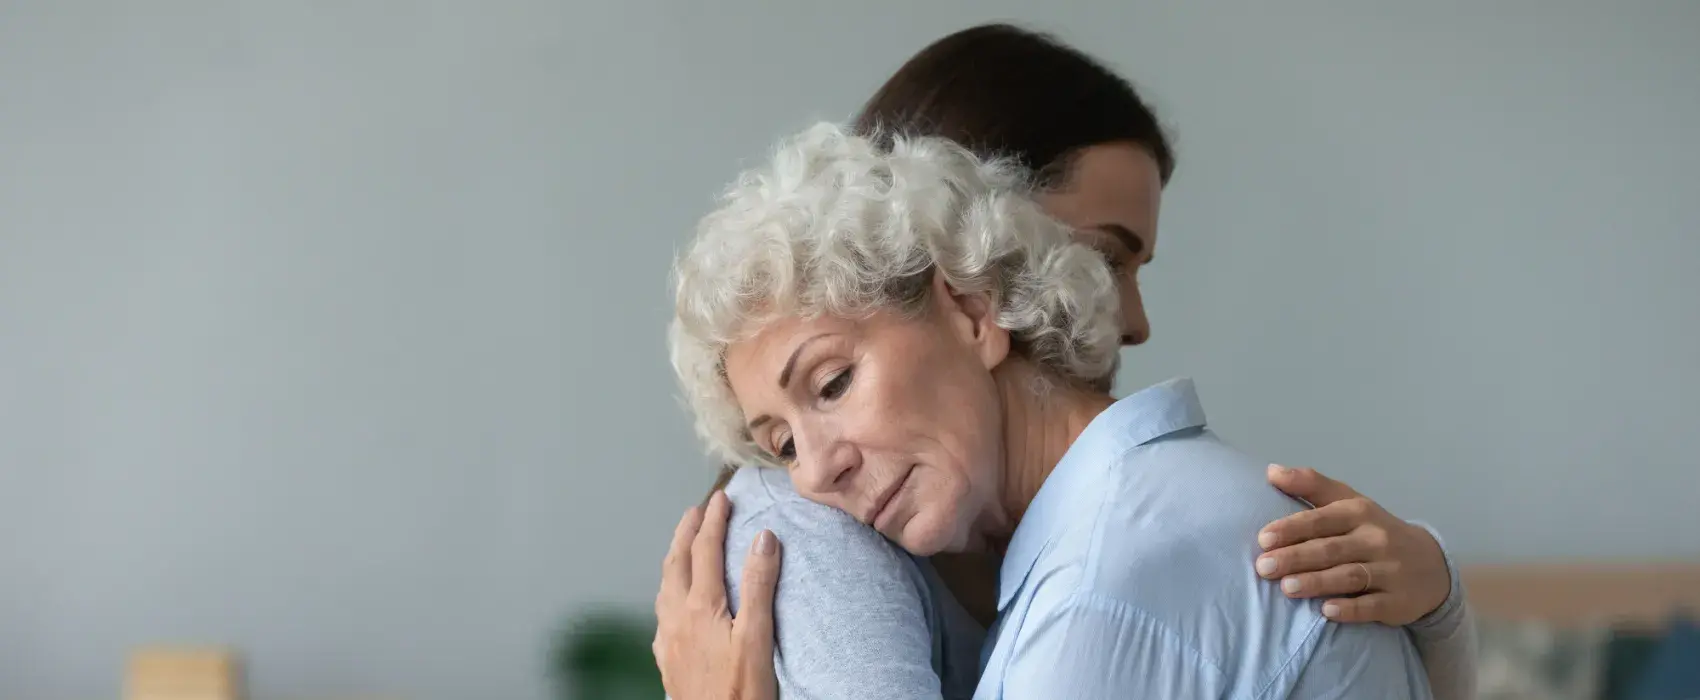 Lady hugging an older woman